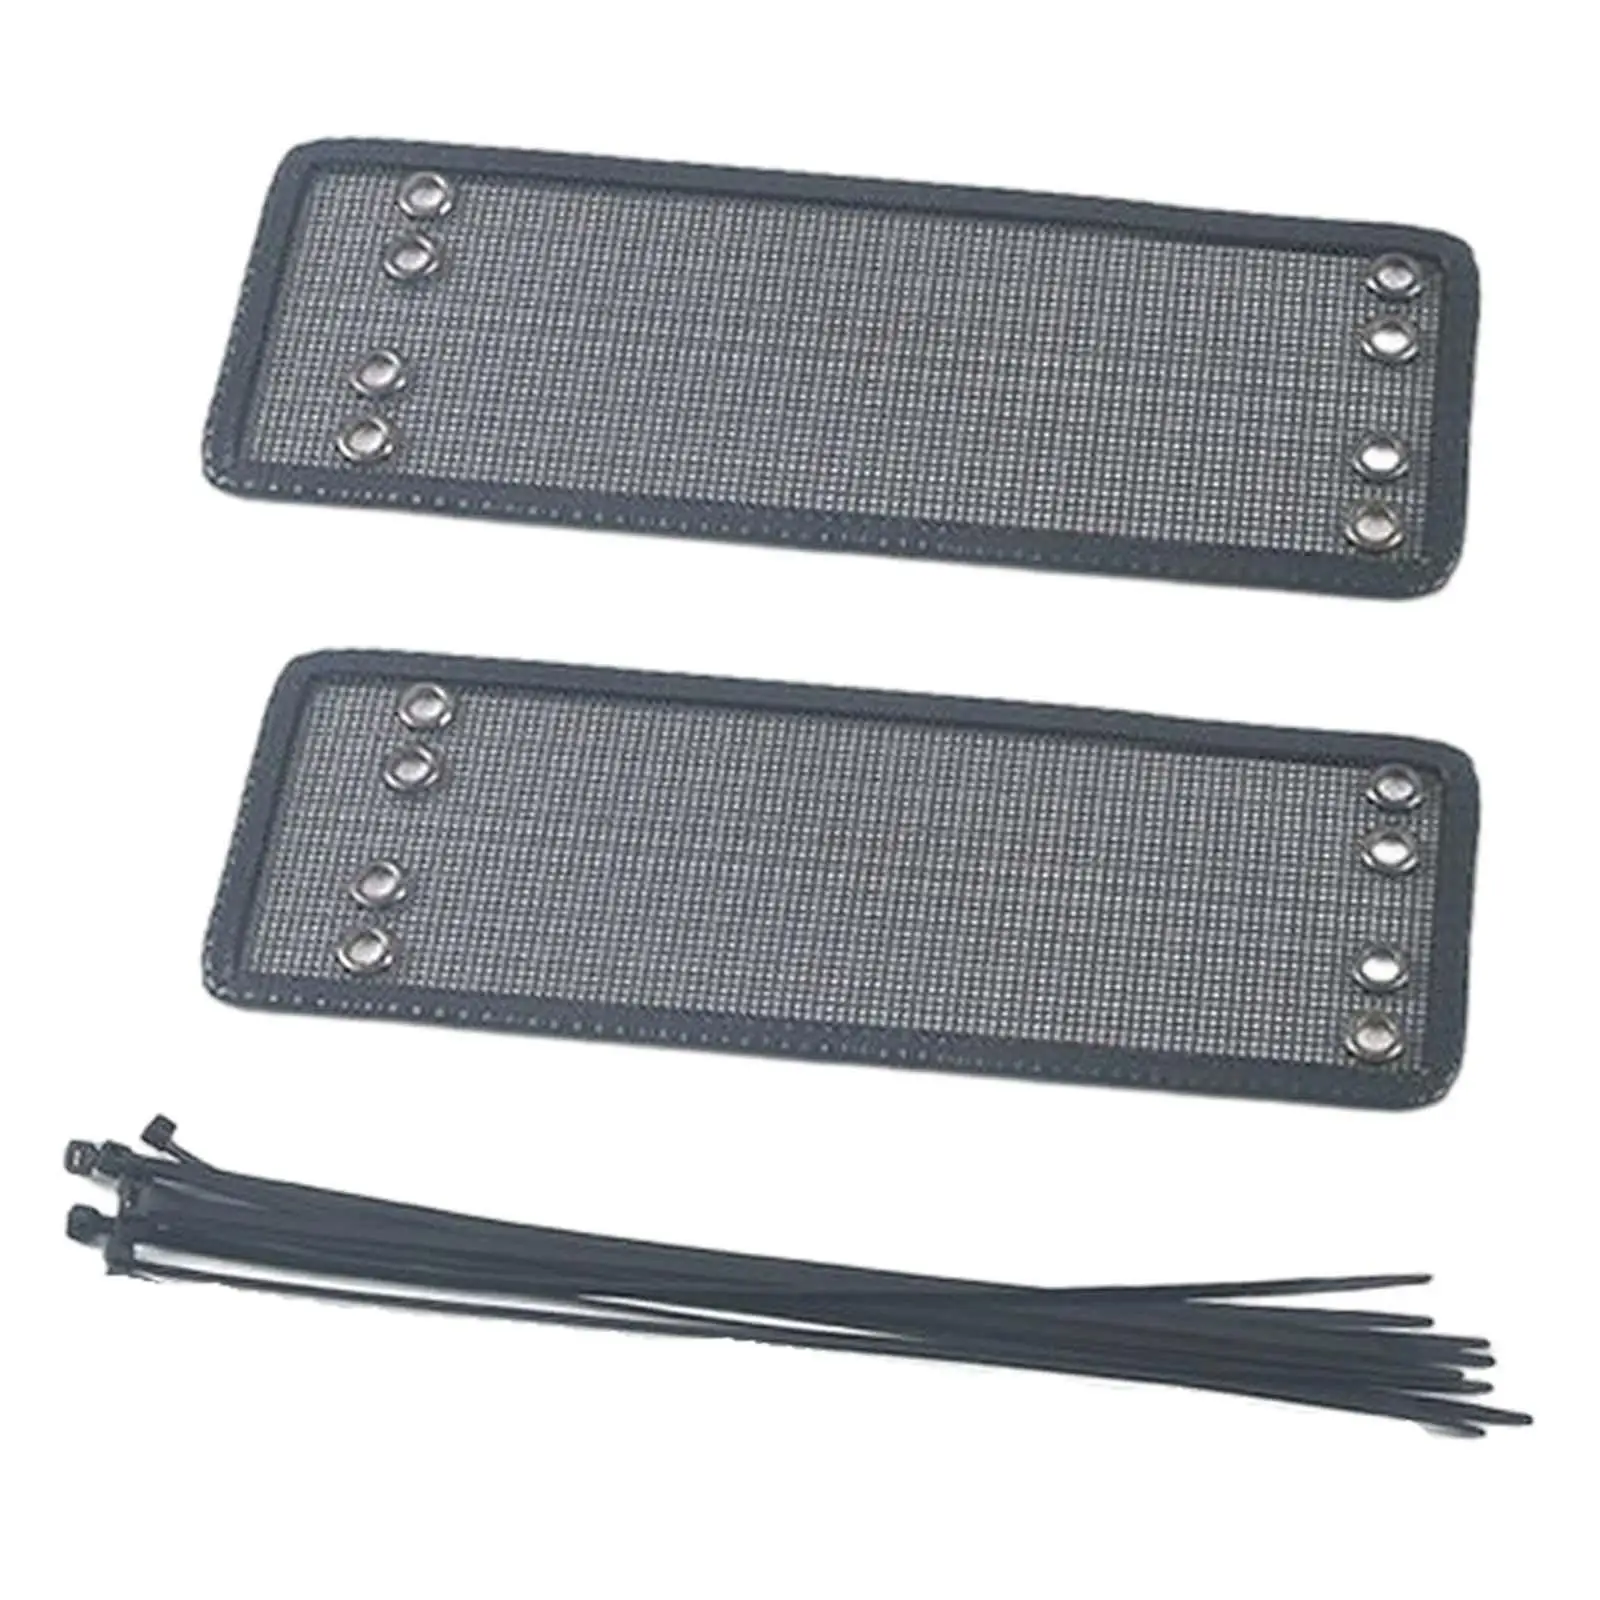 Front Grille Mesh Stainless Steel Exterior Parts for Byd Atto 3 21 Accessories High Performance Replaces Durable